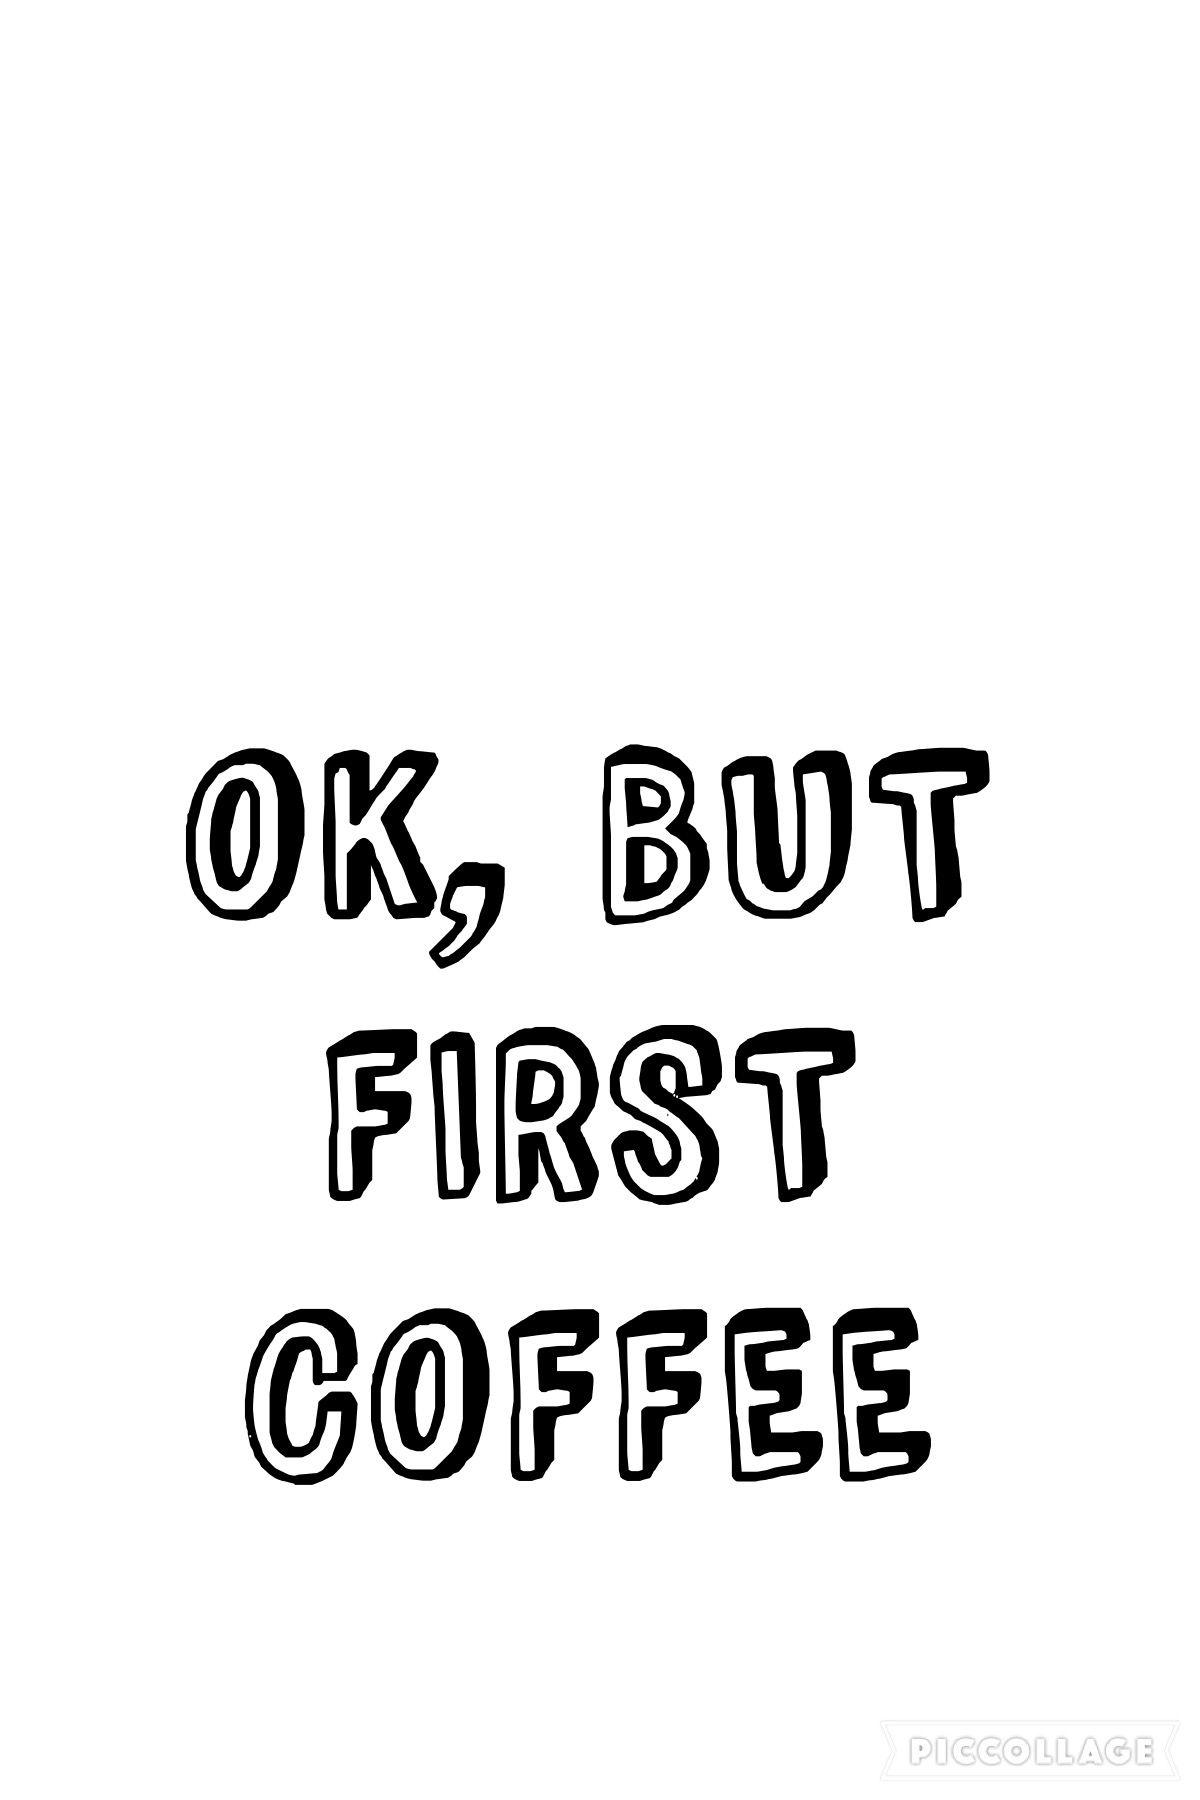 Ok, but first coffee iphone wallpaper. •iPhone Wallpaper• in 2019